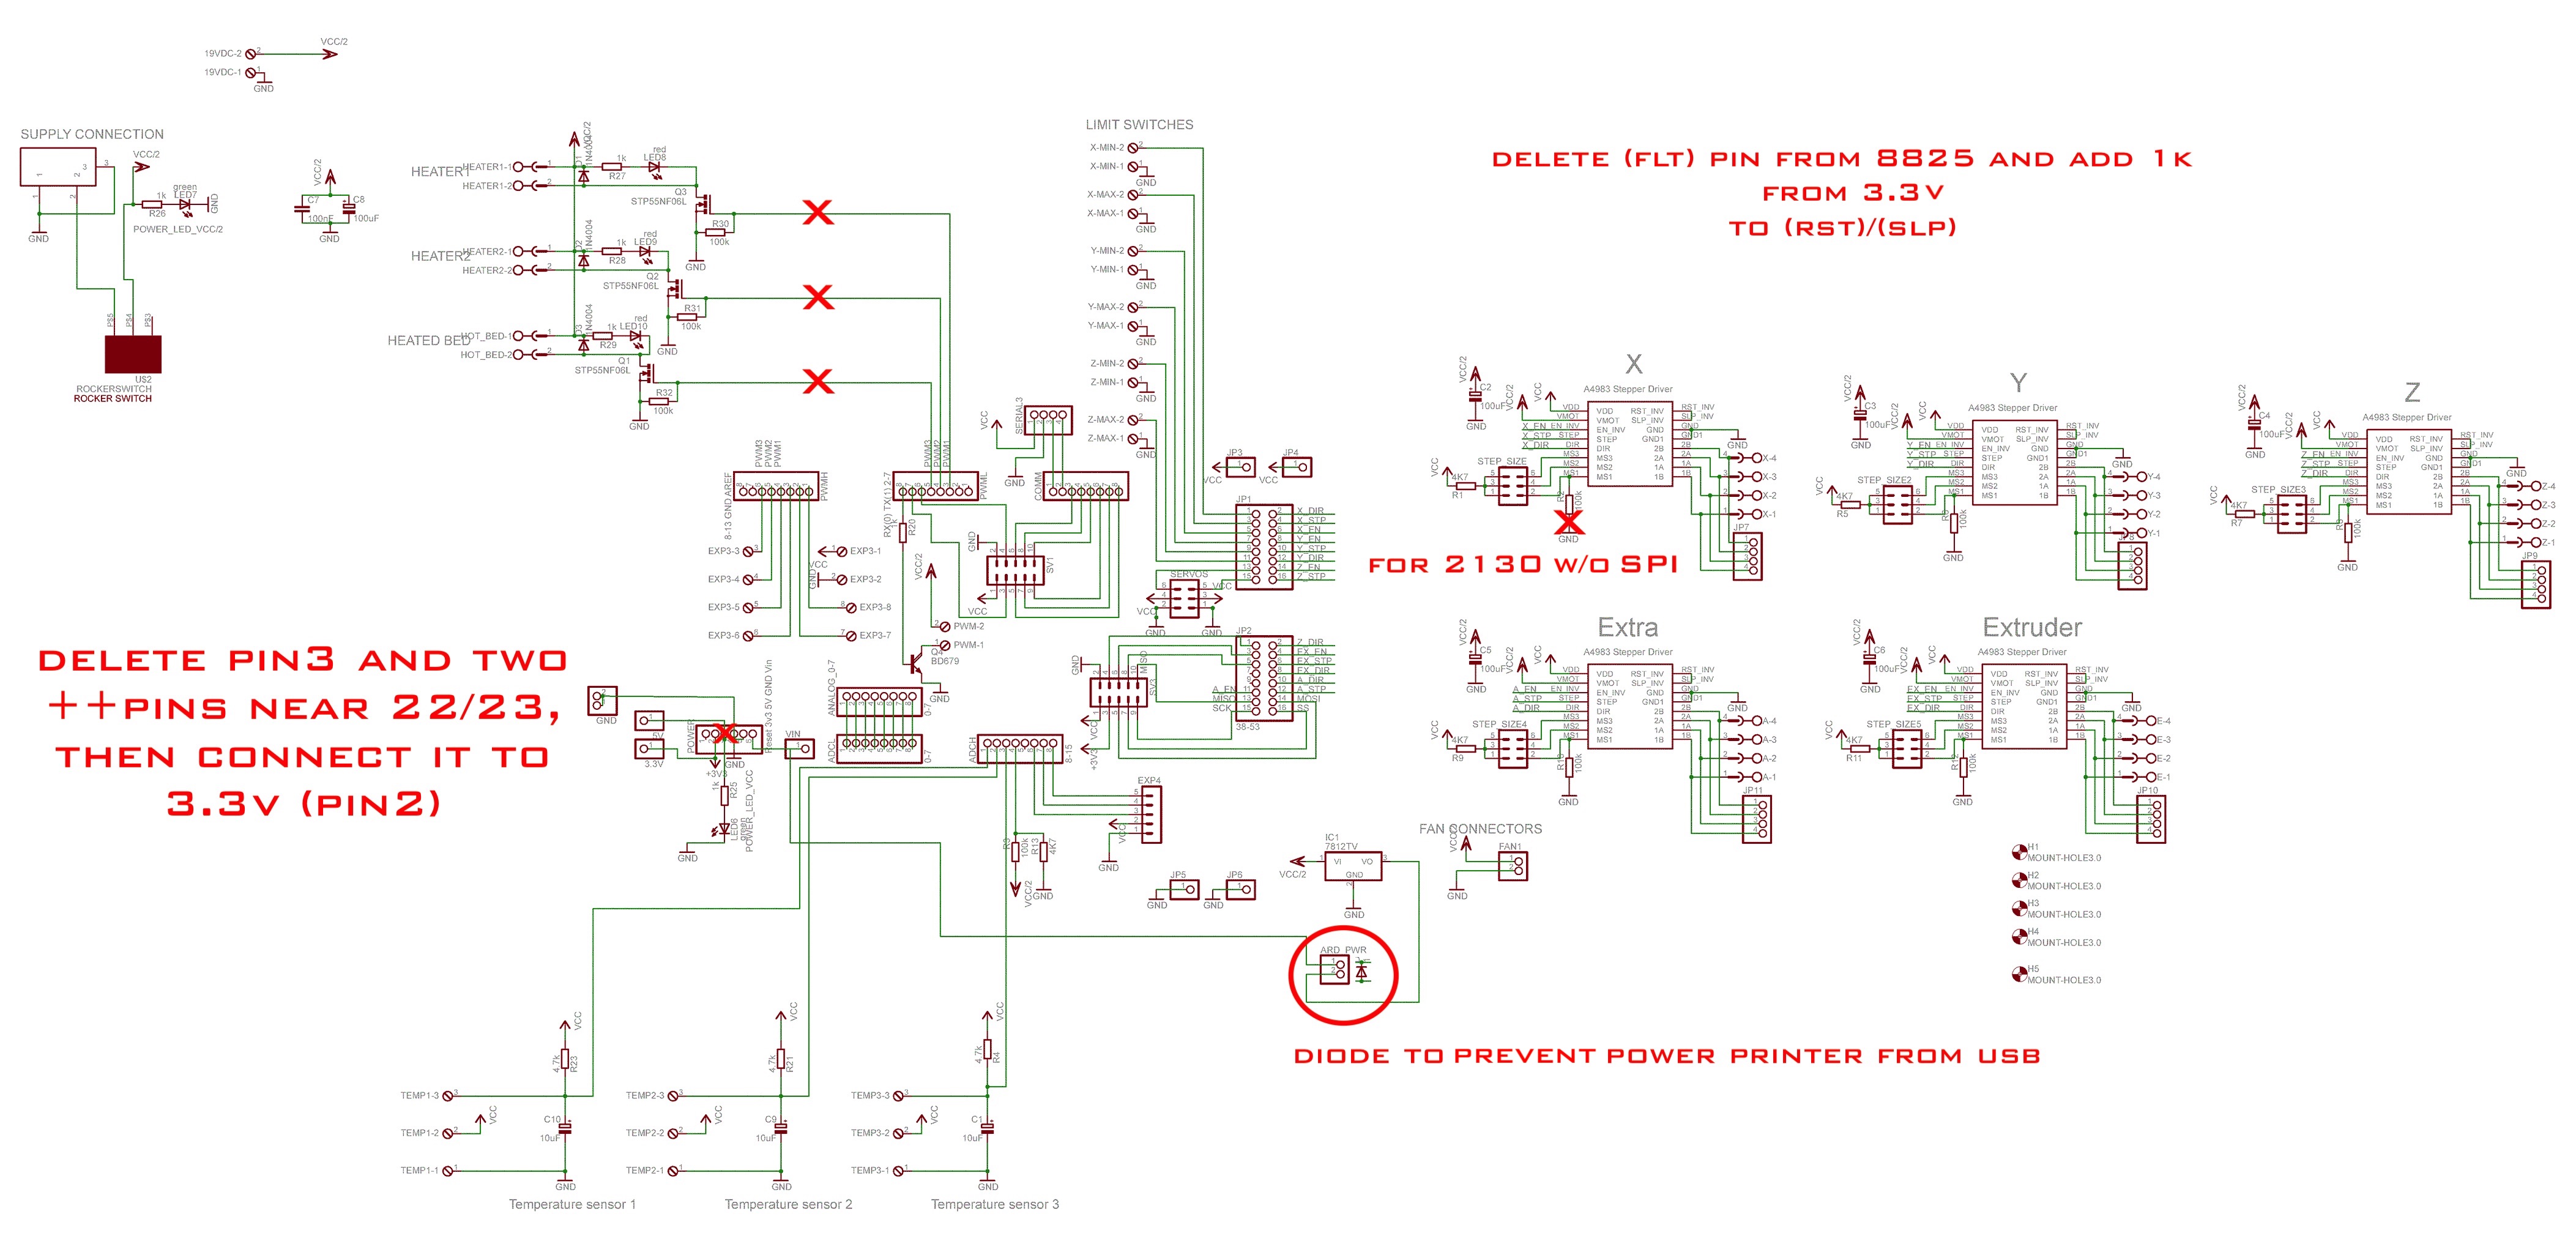 Modification reference for Ultimaker Shield